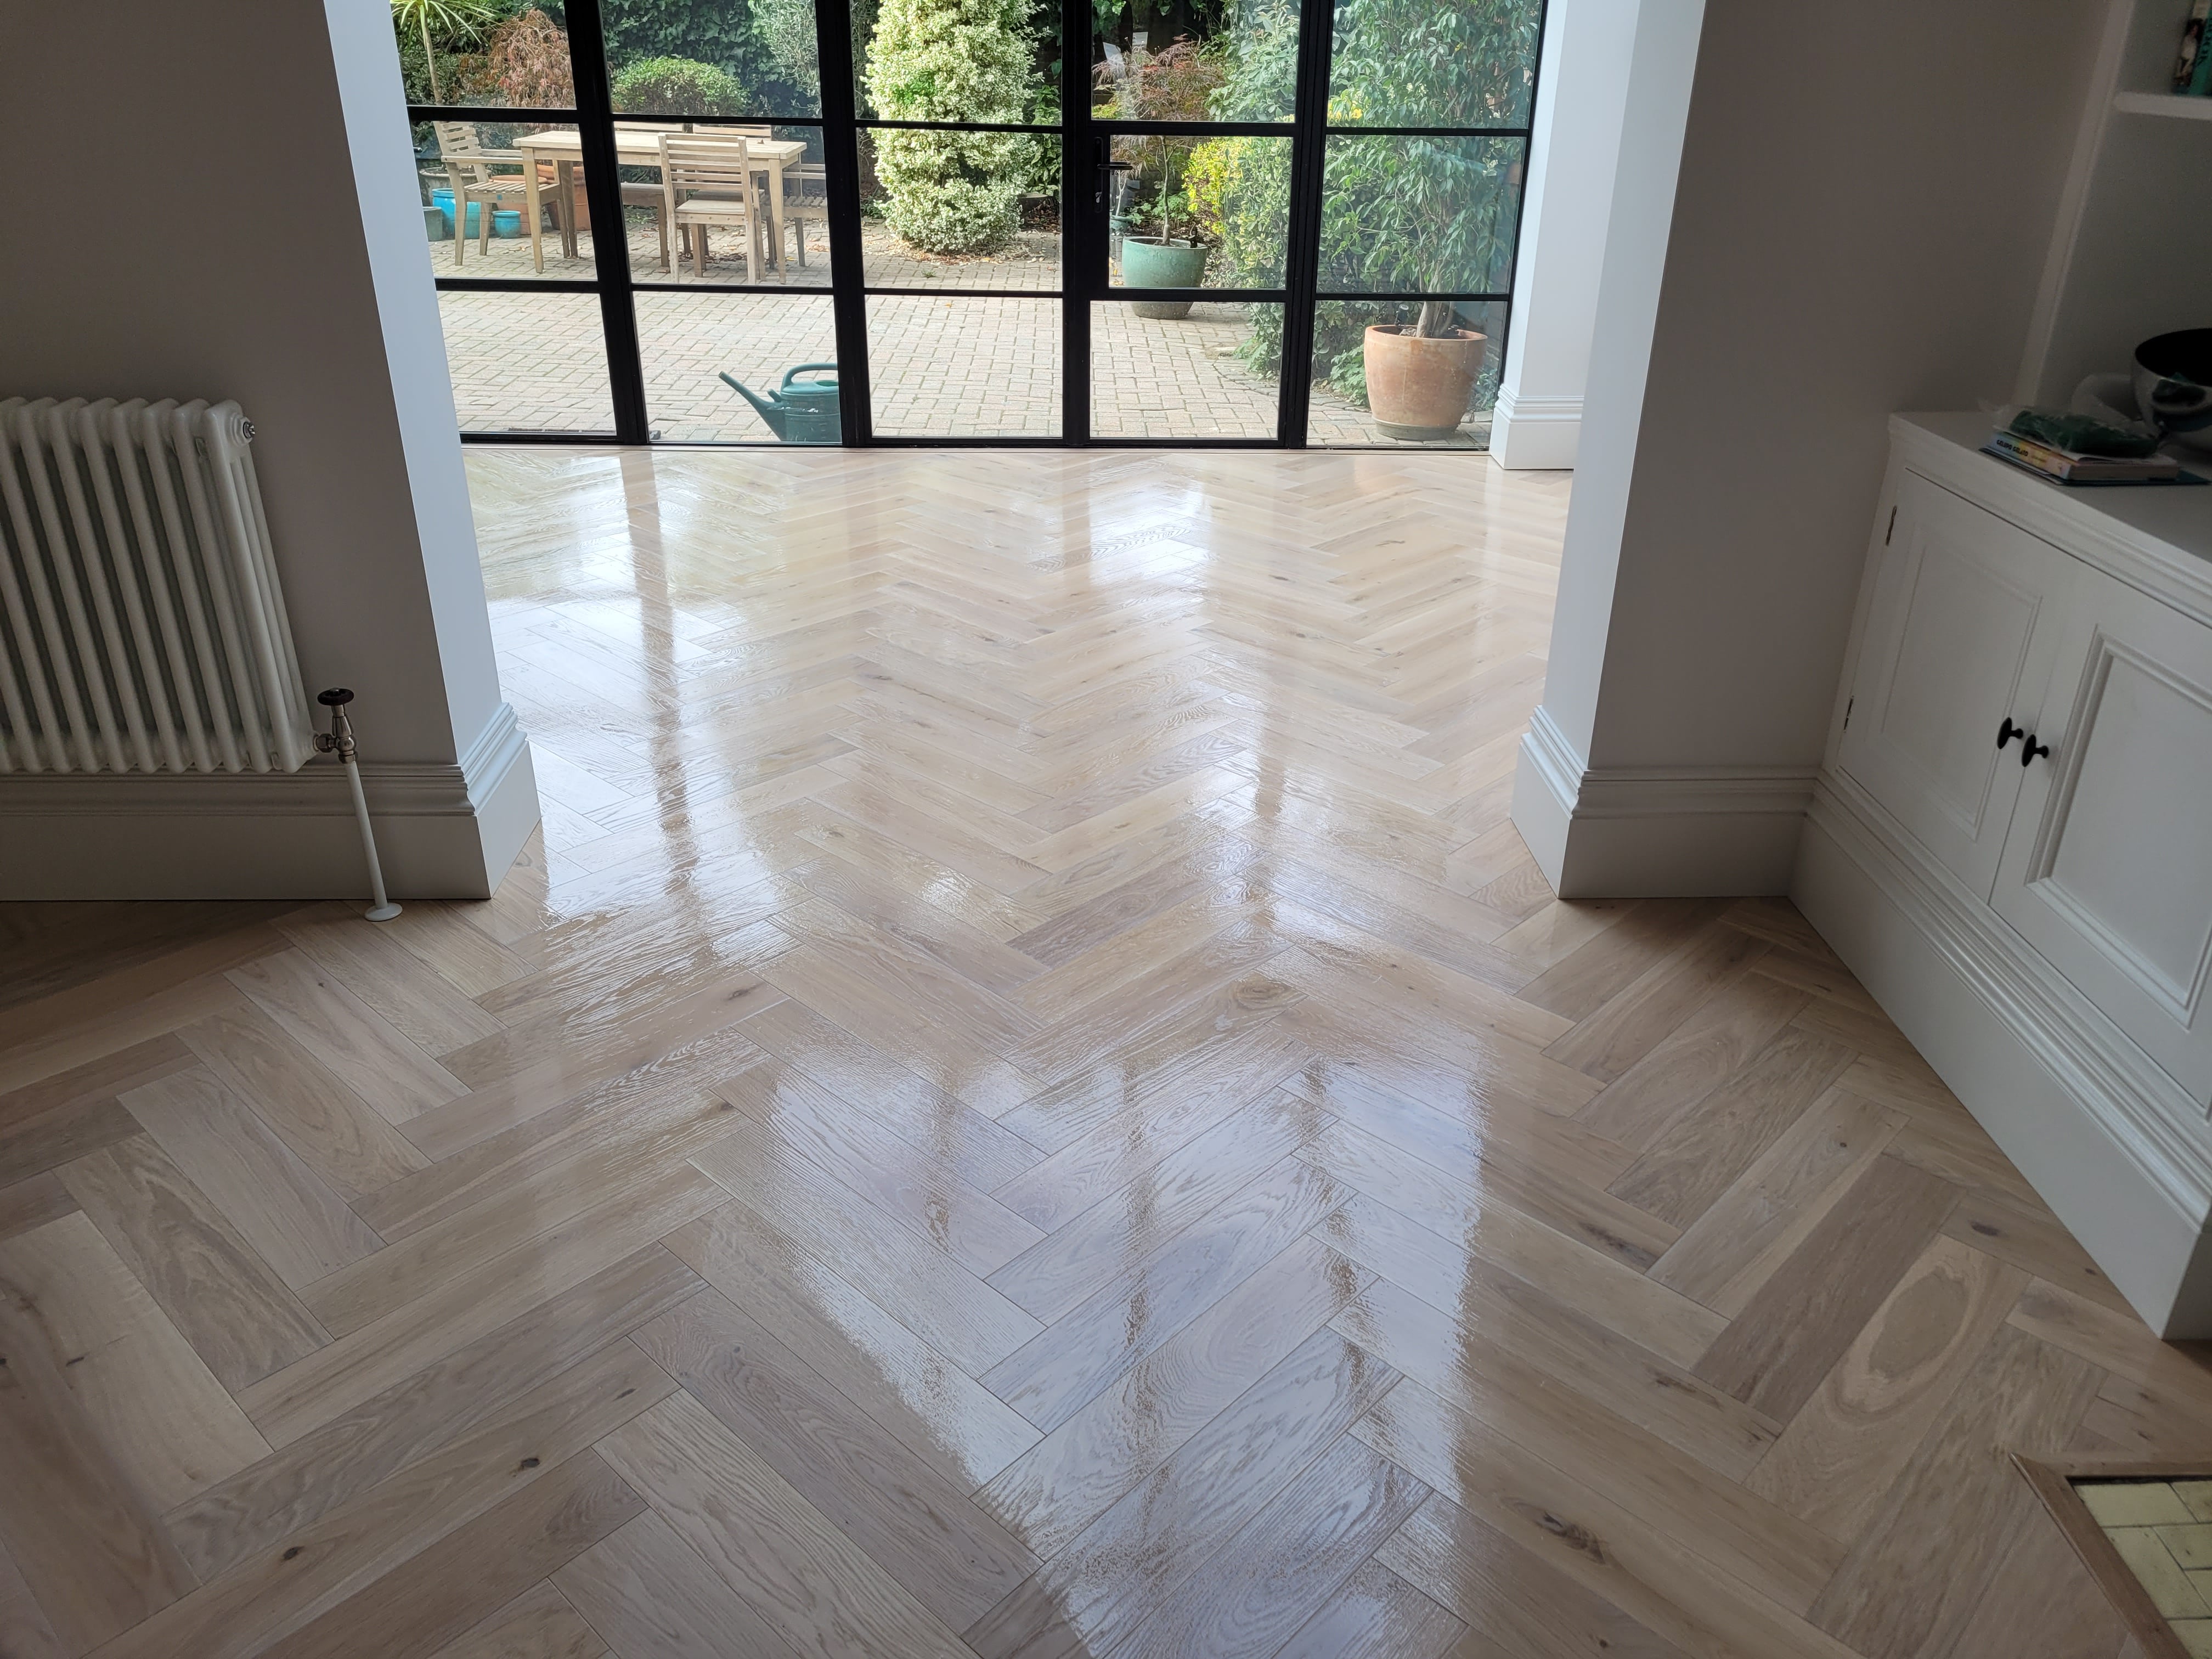 Expertly restored 6-year-old hardwood floor in Caterham, CR3. Mr Sander® used Bona 2.5K Frost whitewashing and Traffic HD 15% sheen matte lacquer. Durable and stunning, this finish guarantees long-lasting beauty.